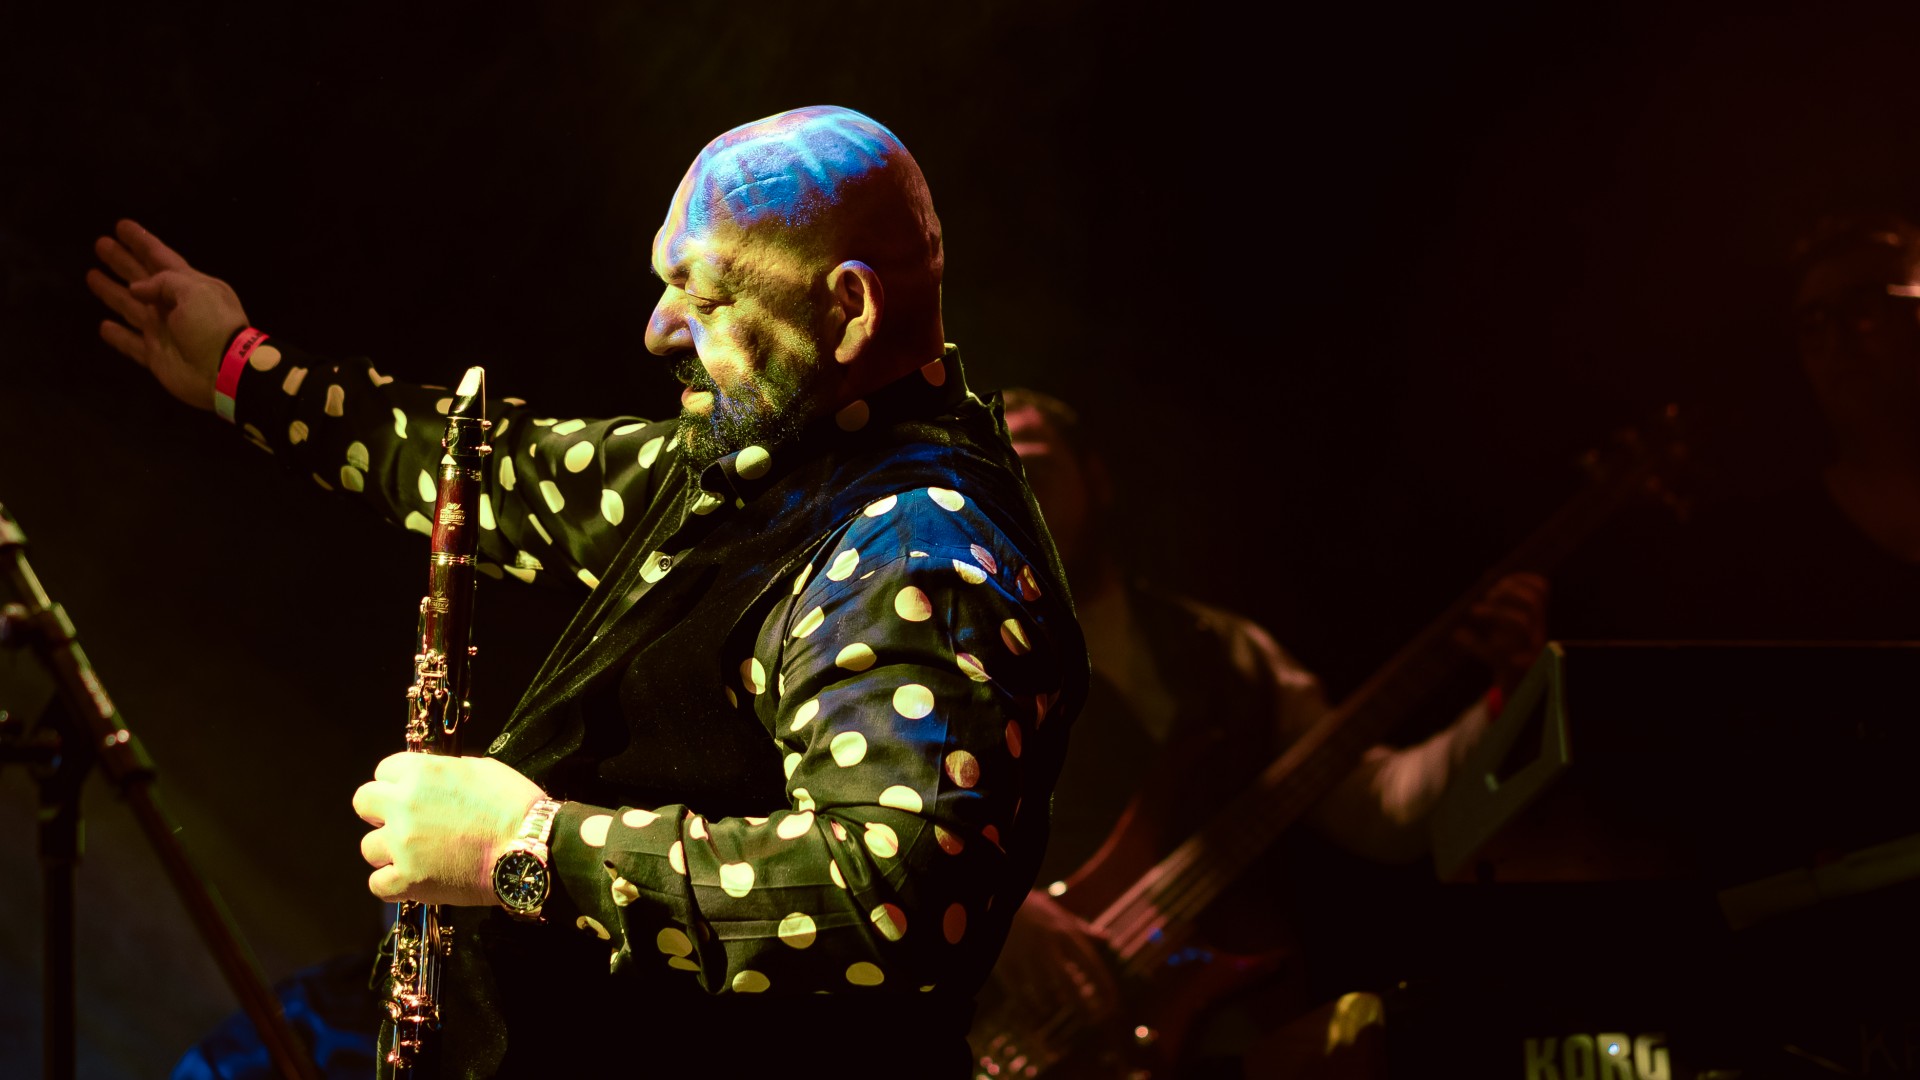 Mieluta Bibescu Gipsy Jazz Band at Control Club in Bucharest on March 3, 2022 (a5213560d3)